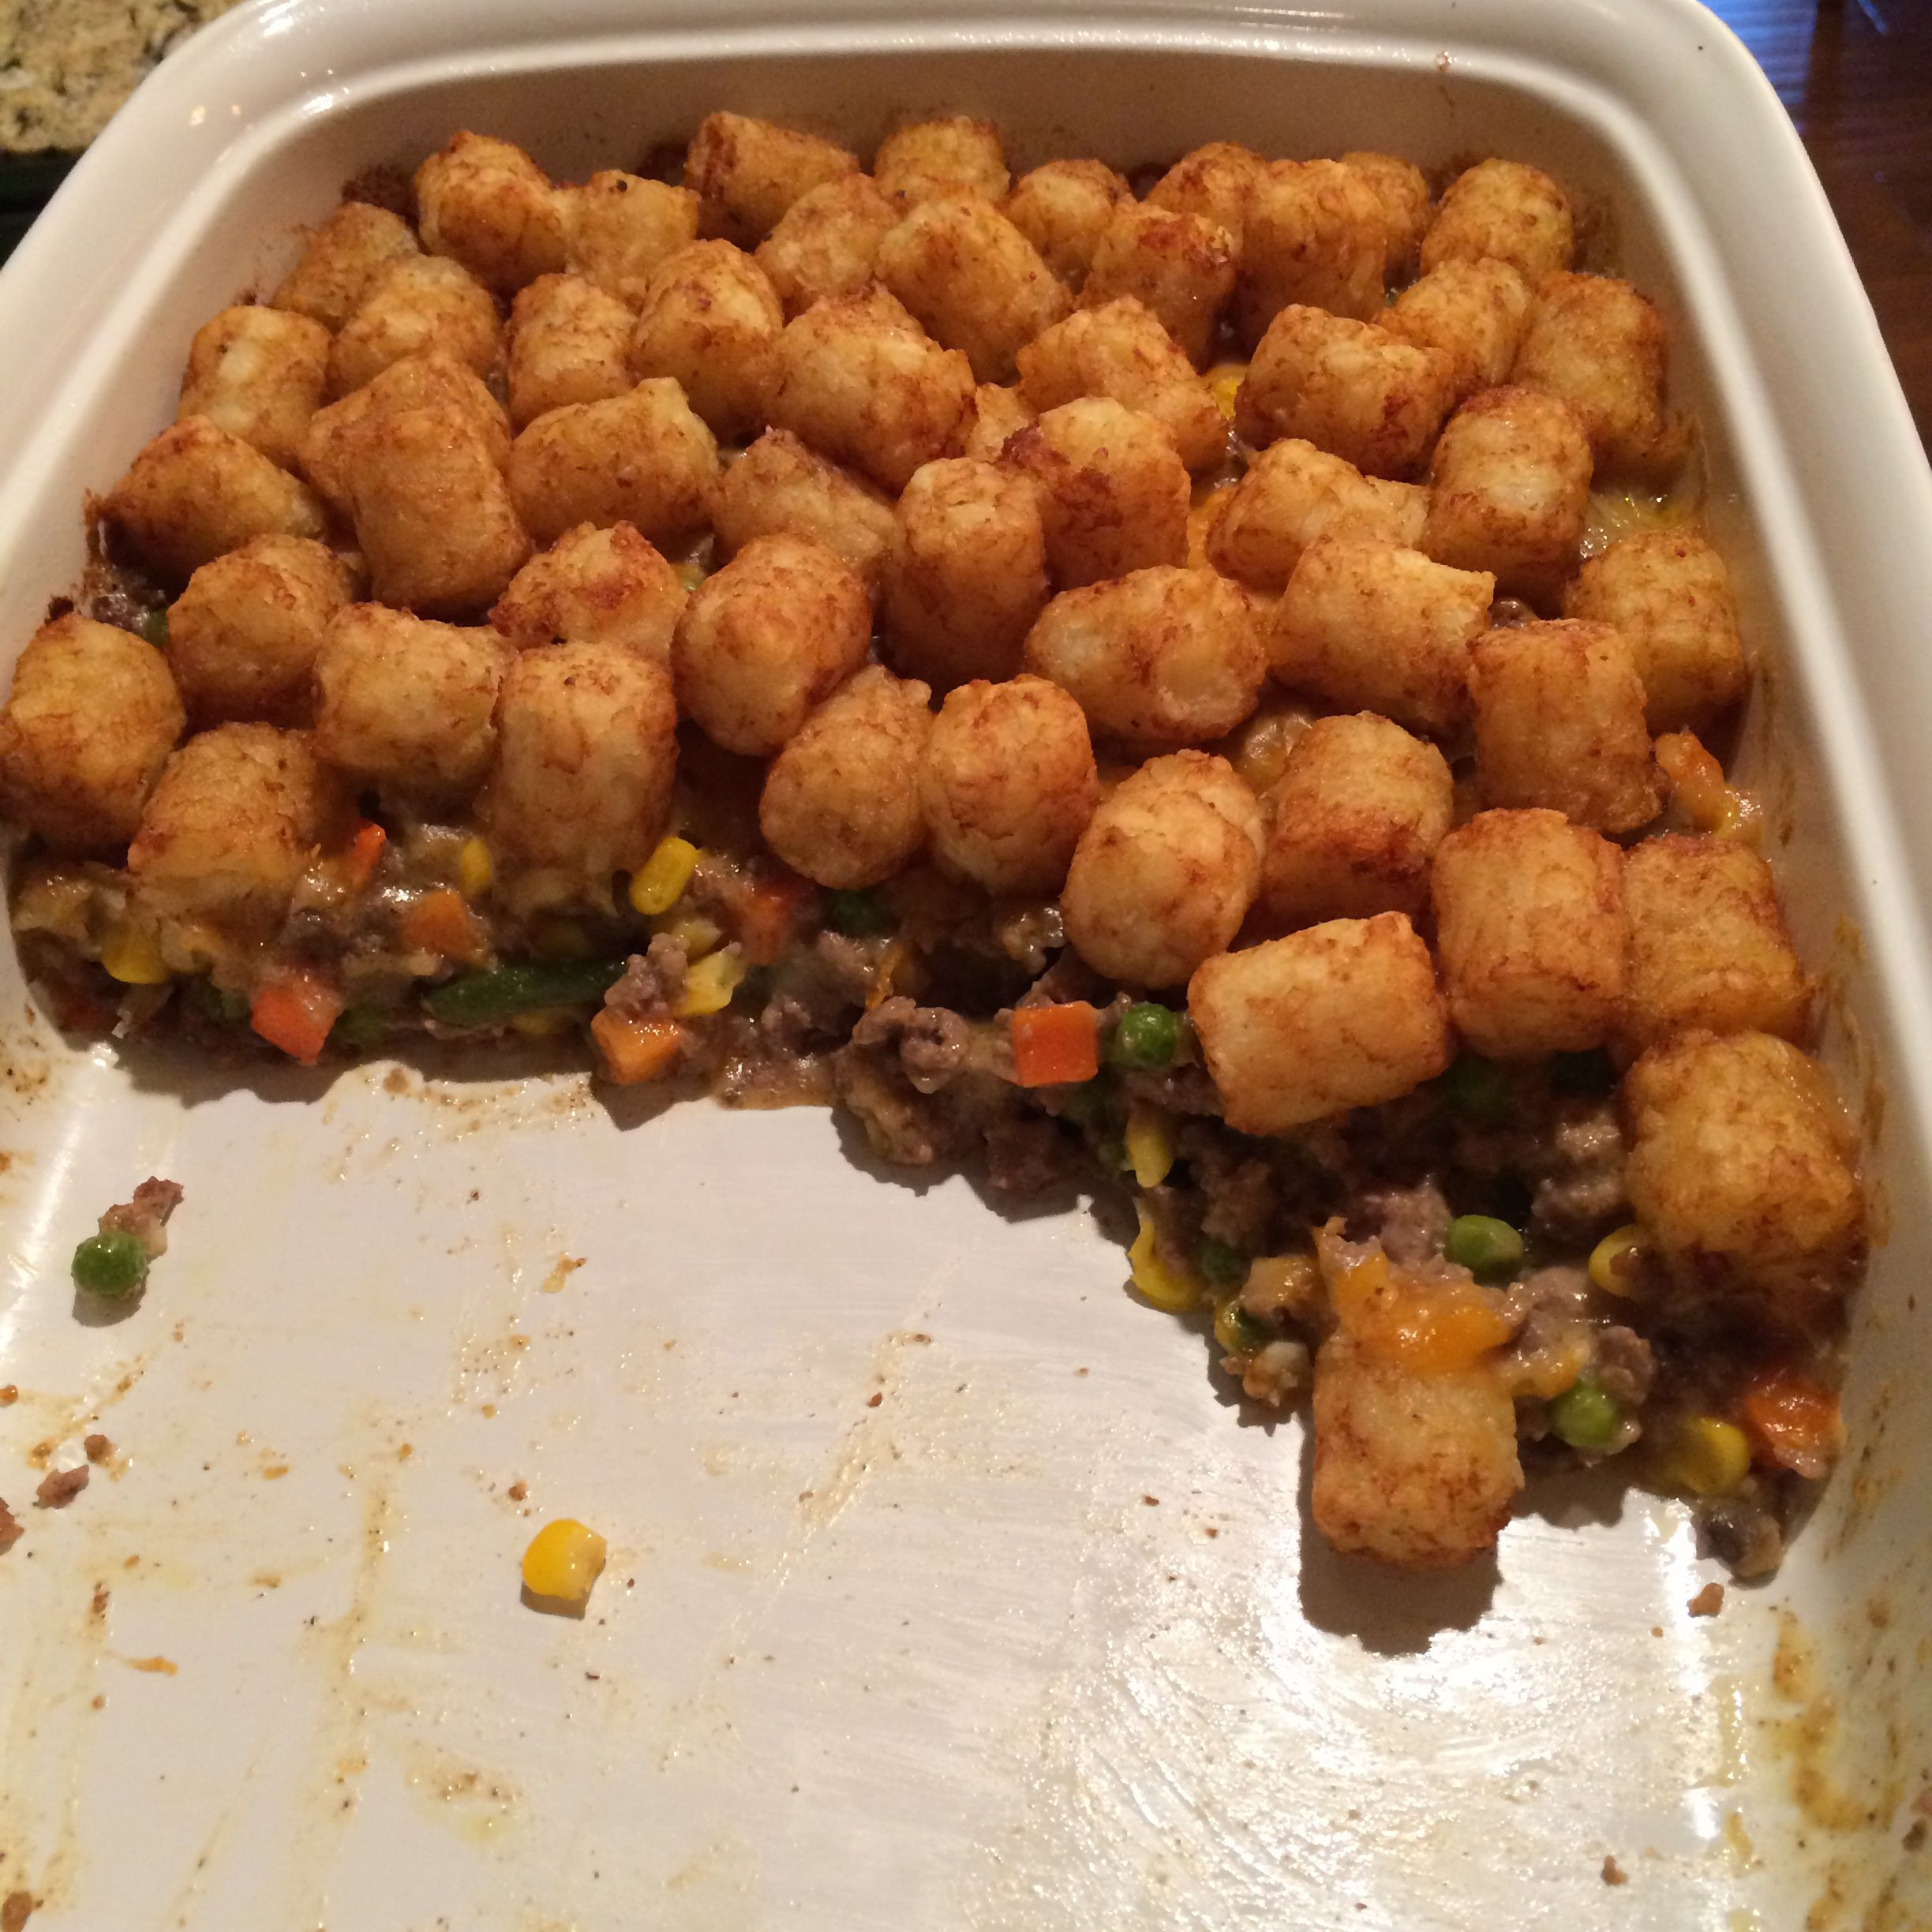 Mixed Vegetable Casserole With Cream Of Mushroom Soup
 Tator Tot Casserole 2 lbs ground beef 16 oz package mixed